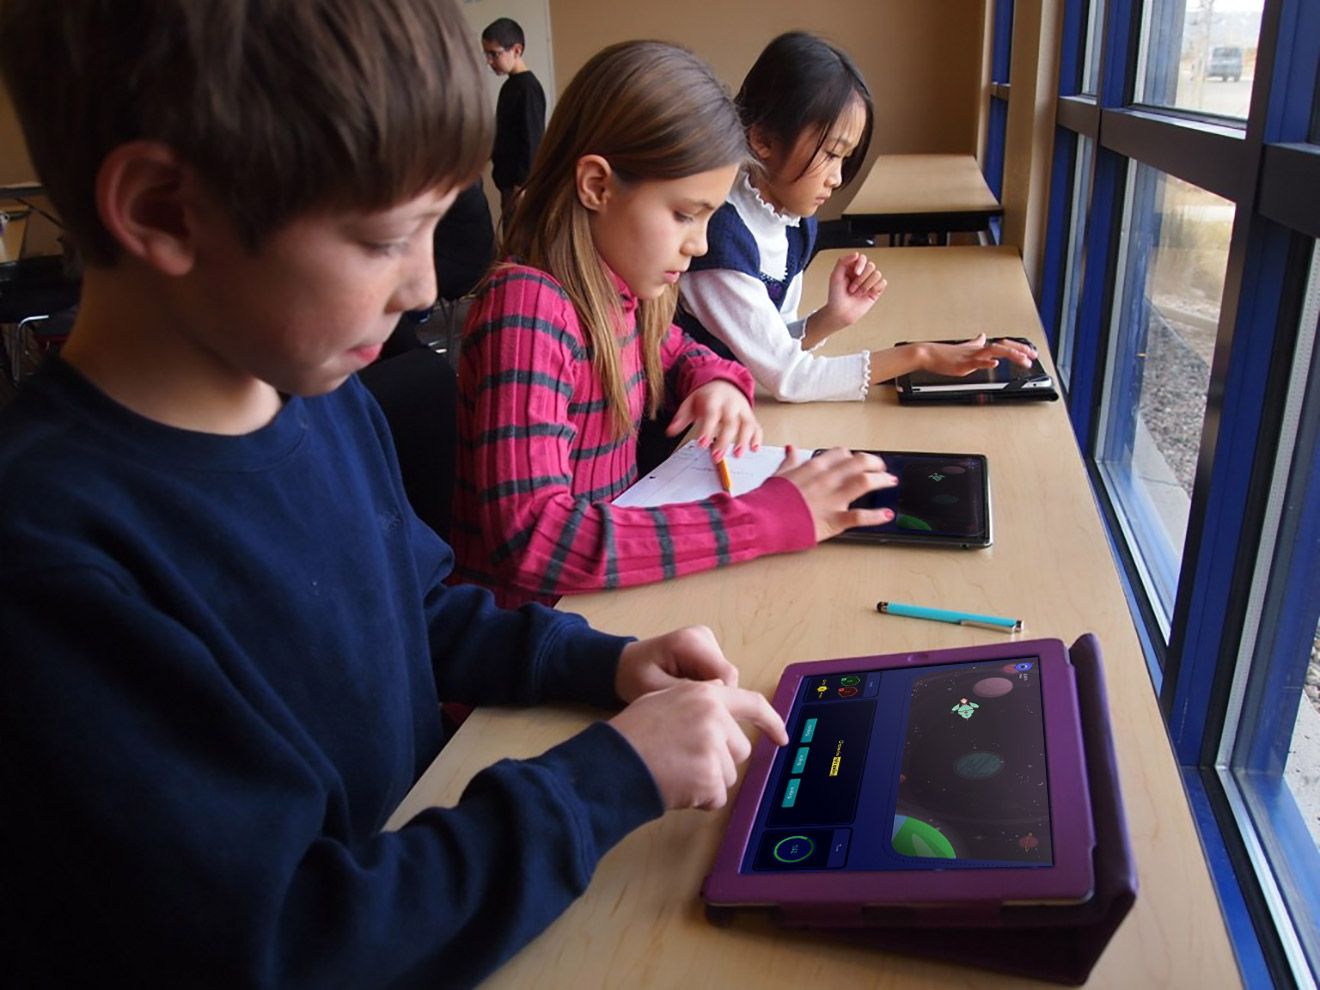 Children playing Educational game on iPads